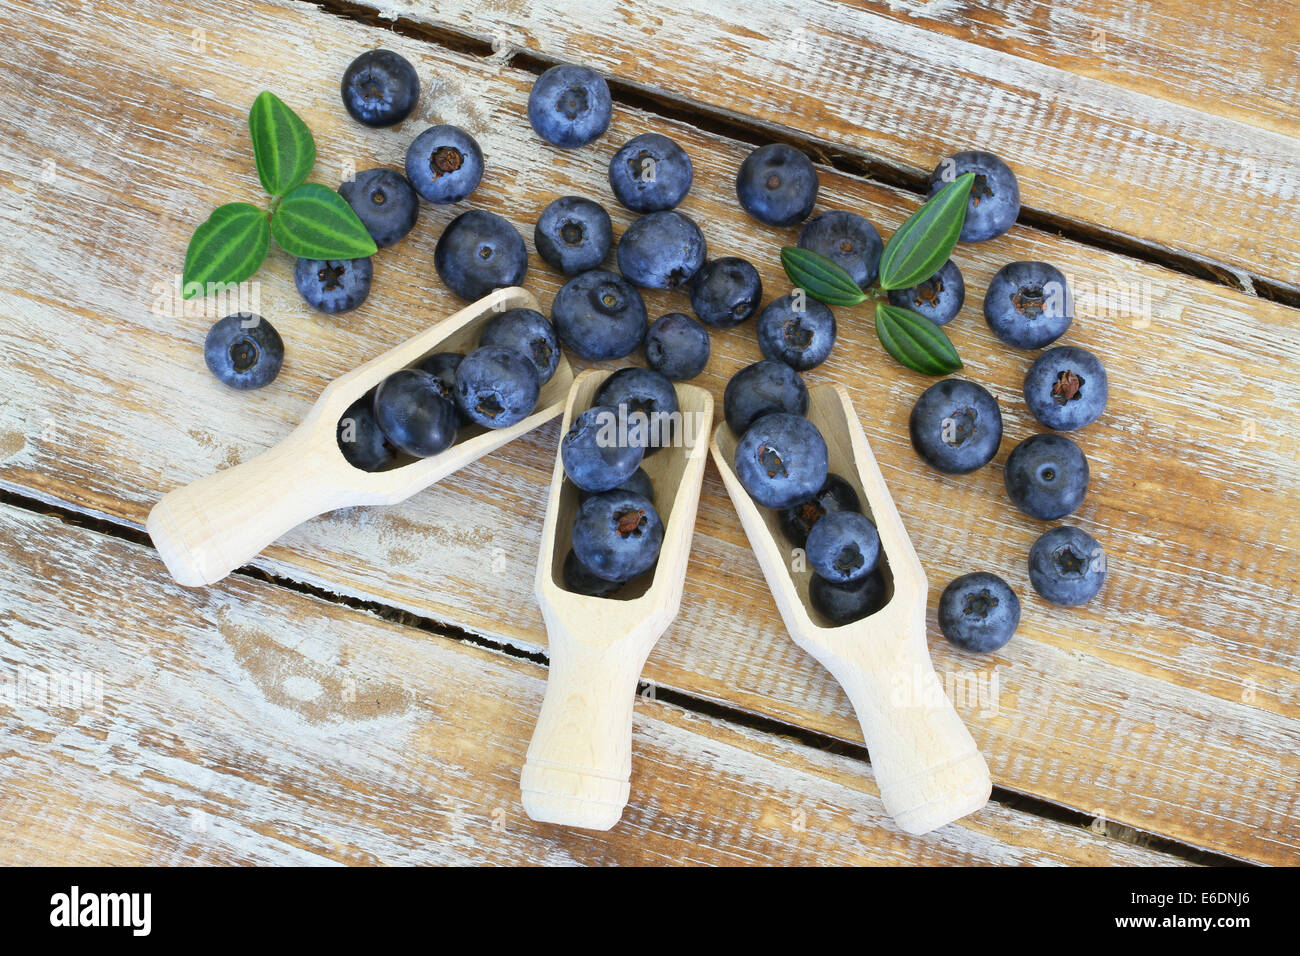 Blueberries on wooden scoops on wooden surface Stock Photo